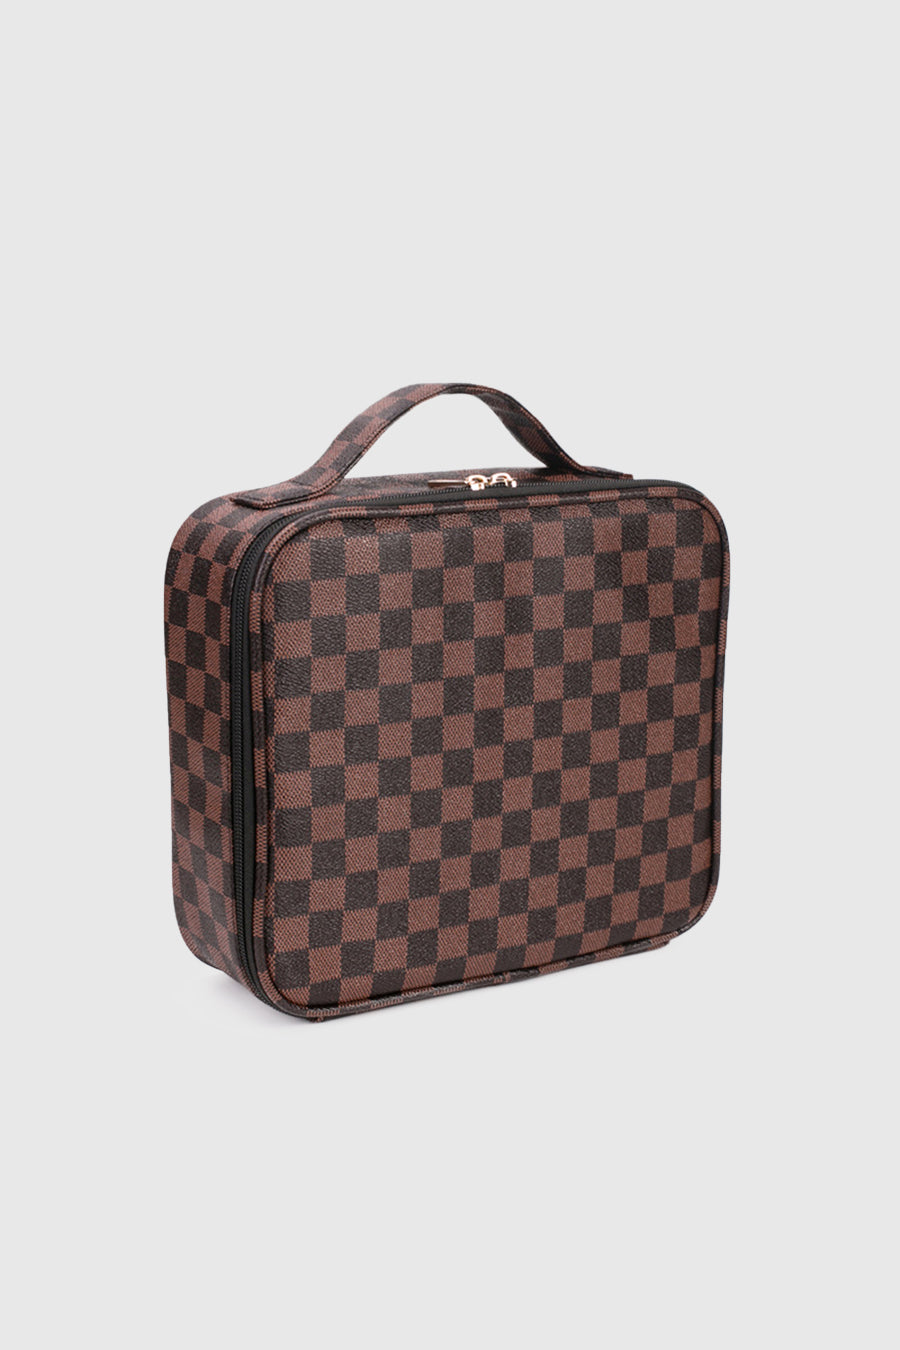 ELAINE VEGAN LEATHER CHECKERED TRAVEL BAG IN BROWN